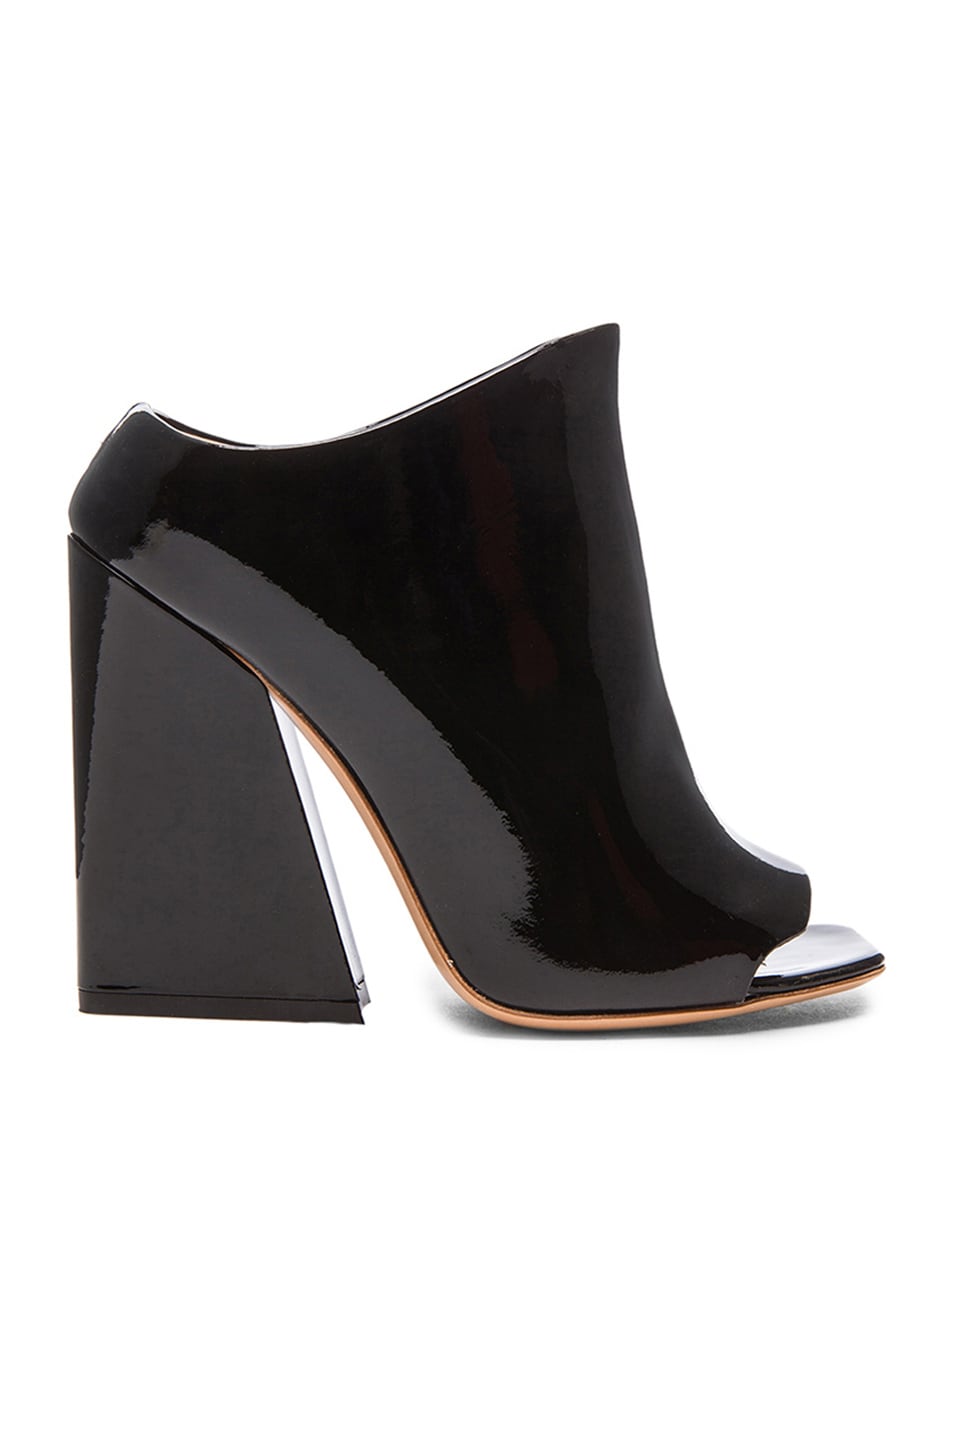 Image 1 of Acne Studios Indi Office Heel Patent Leather Pumps in Black